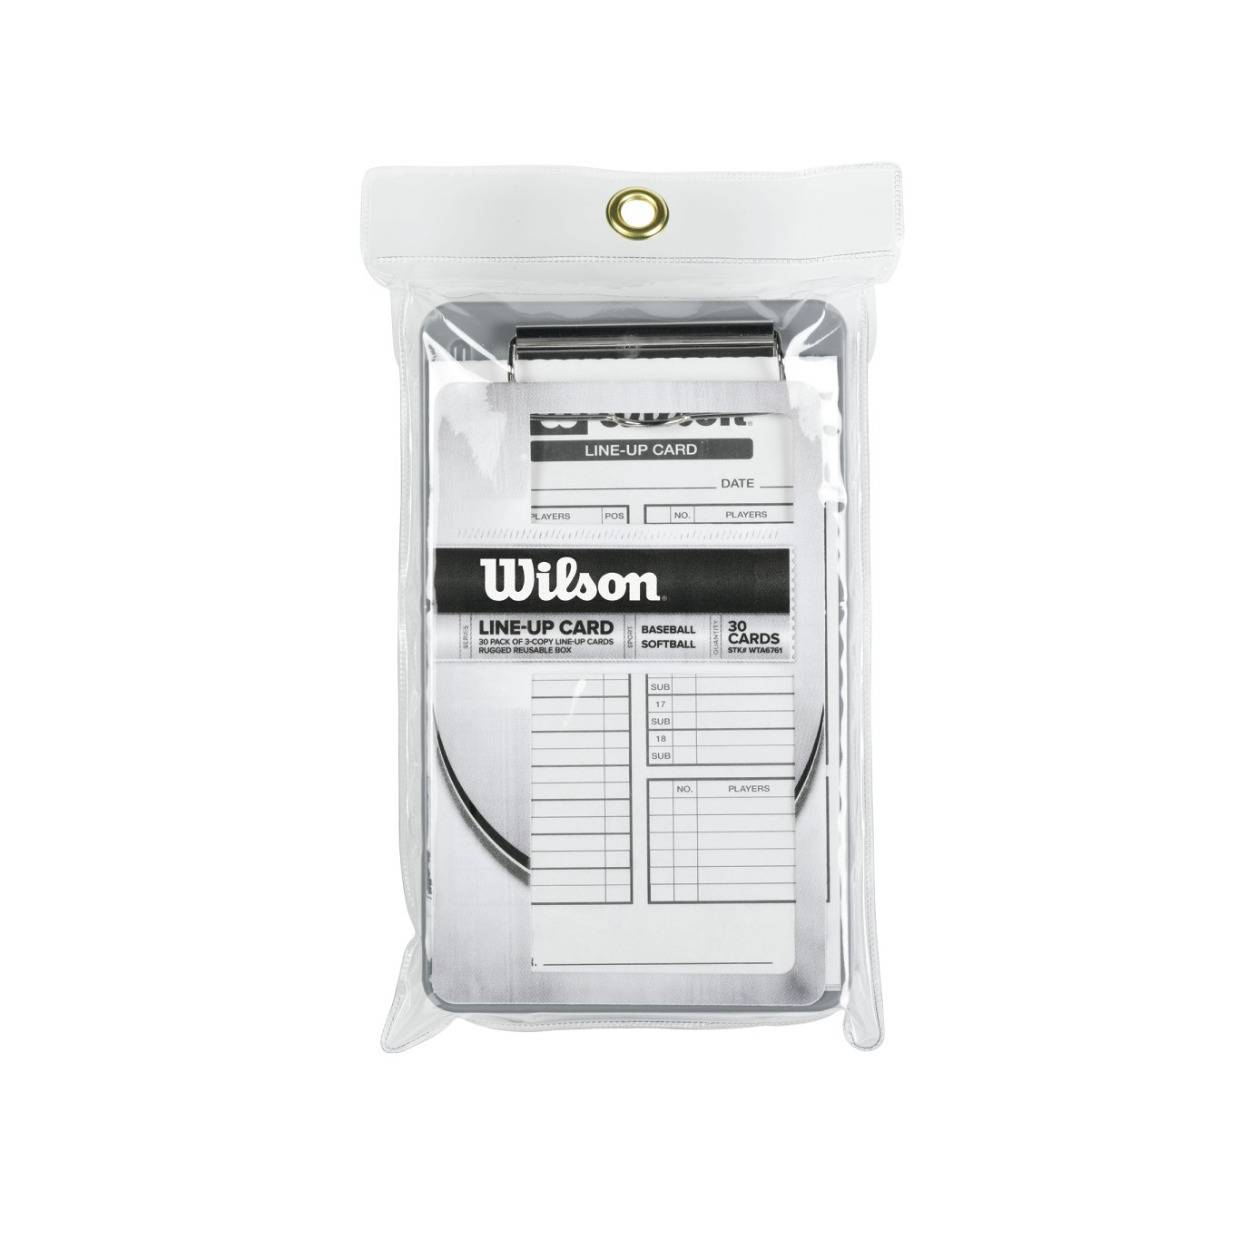 Wilson 3x Lineup Cards (30-Pack Box)